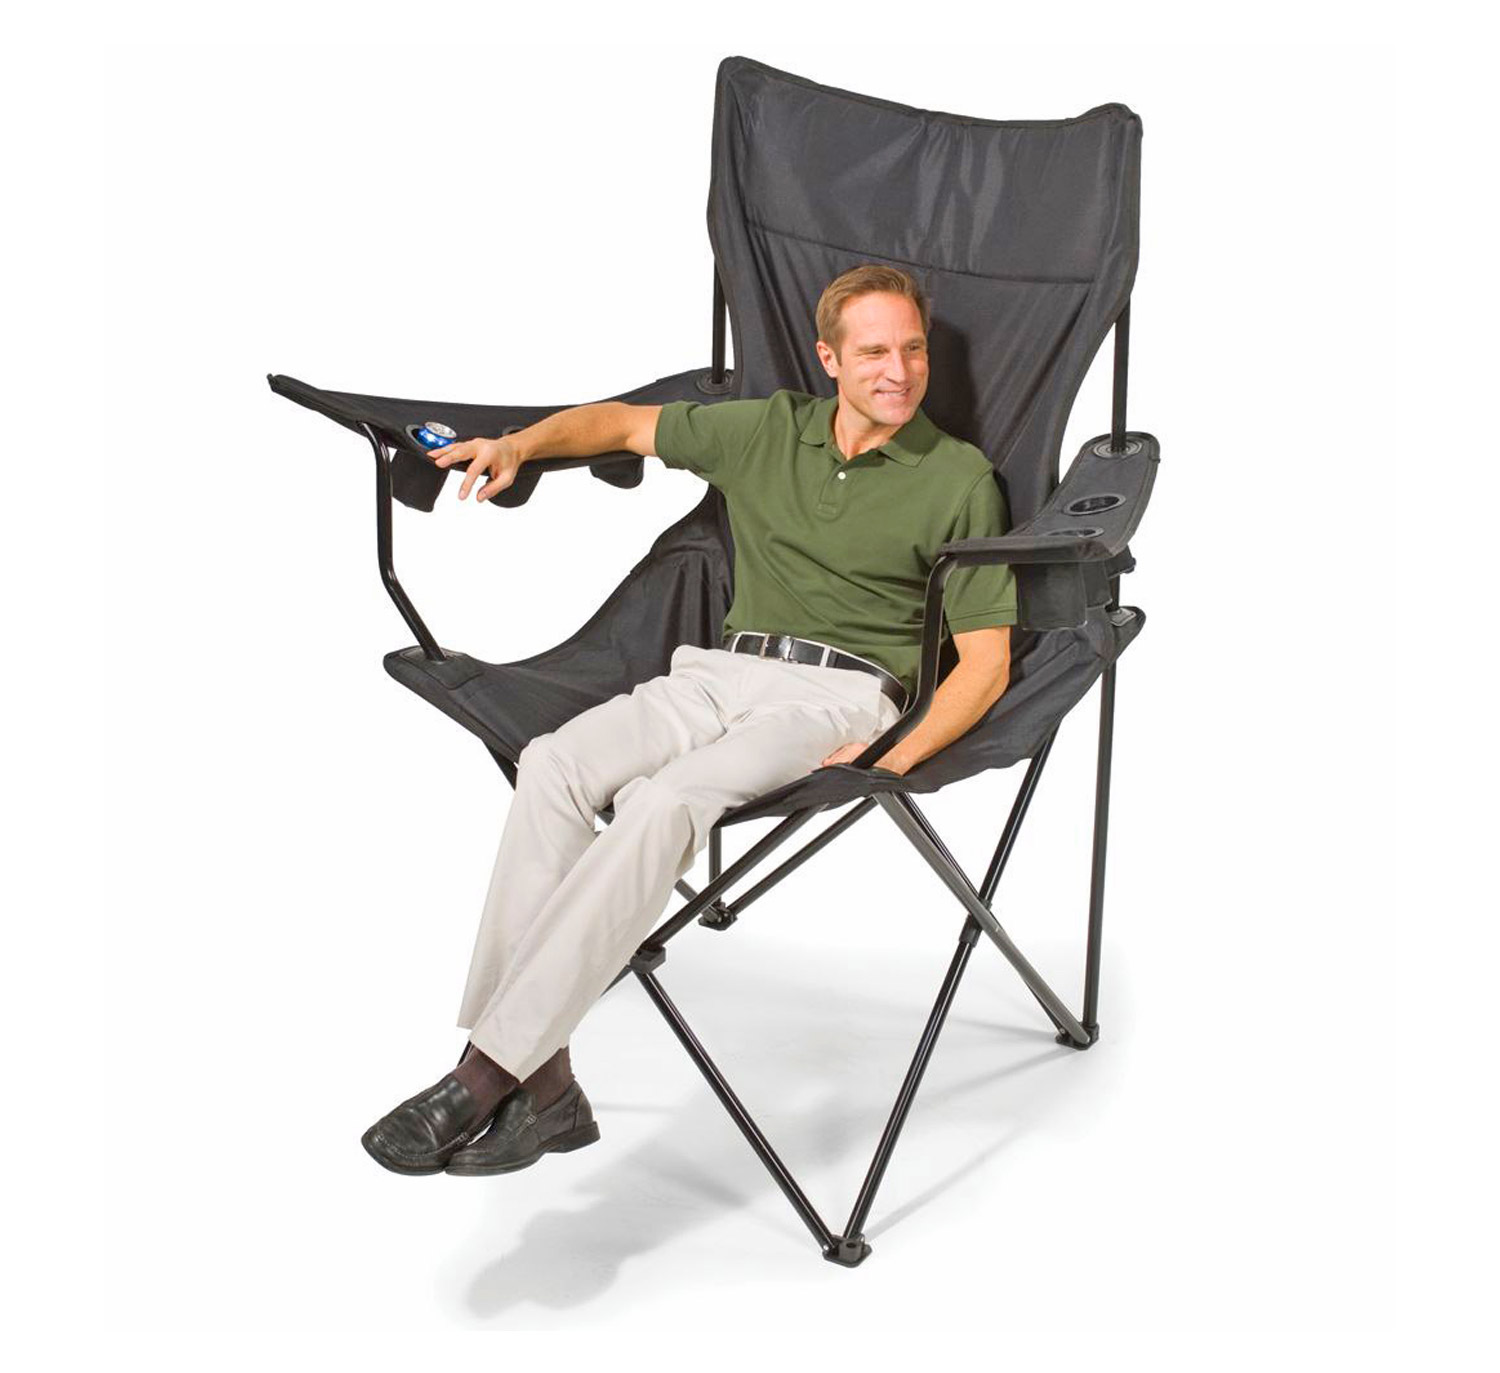 You Can Get A Giant Folding Chair That Has 6 Cup Holders 0 